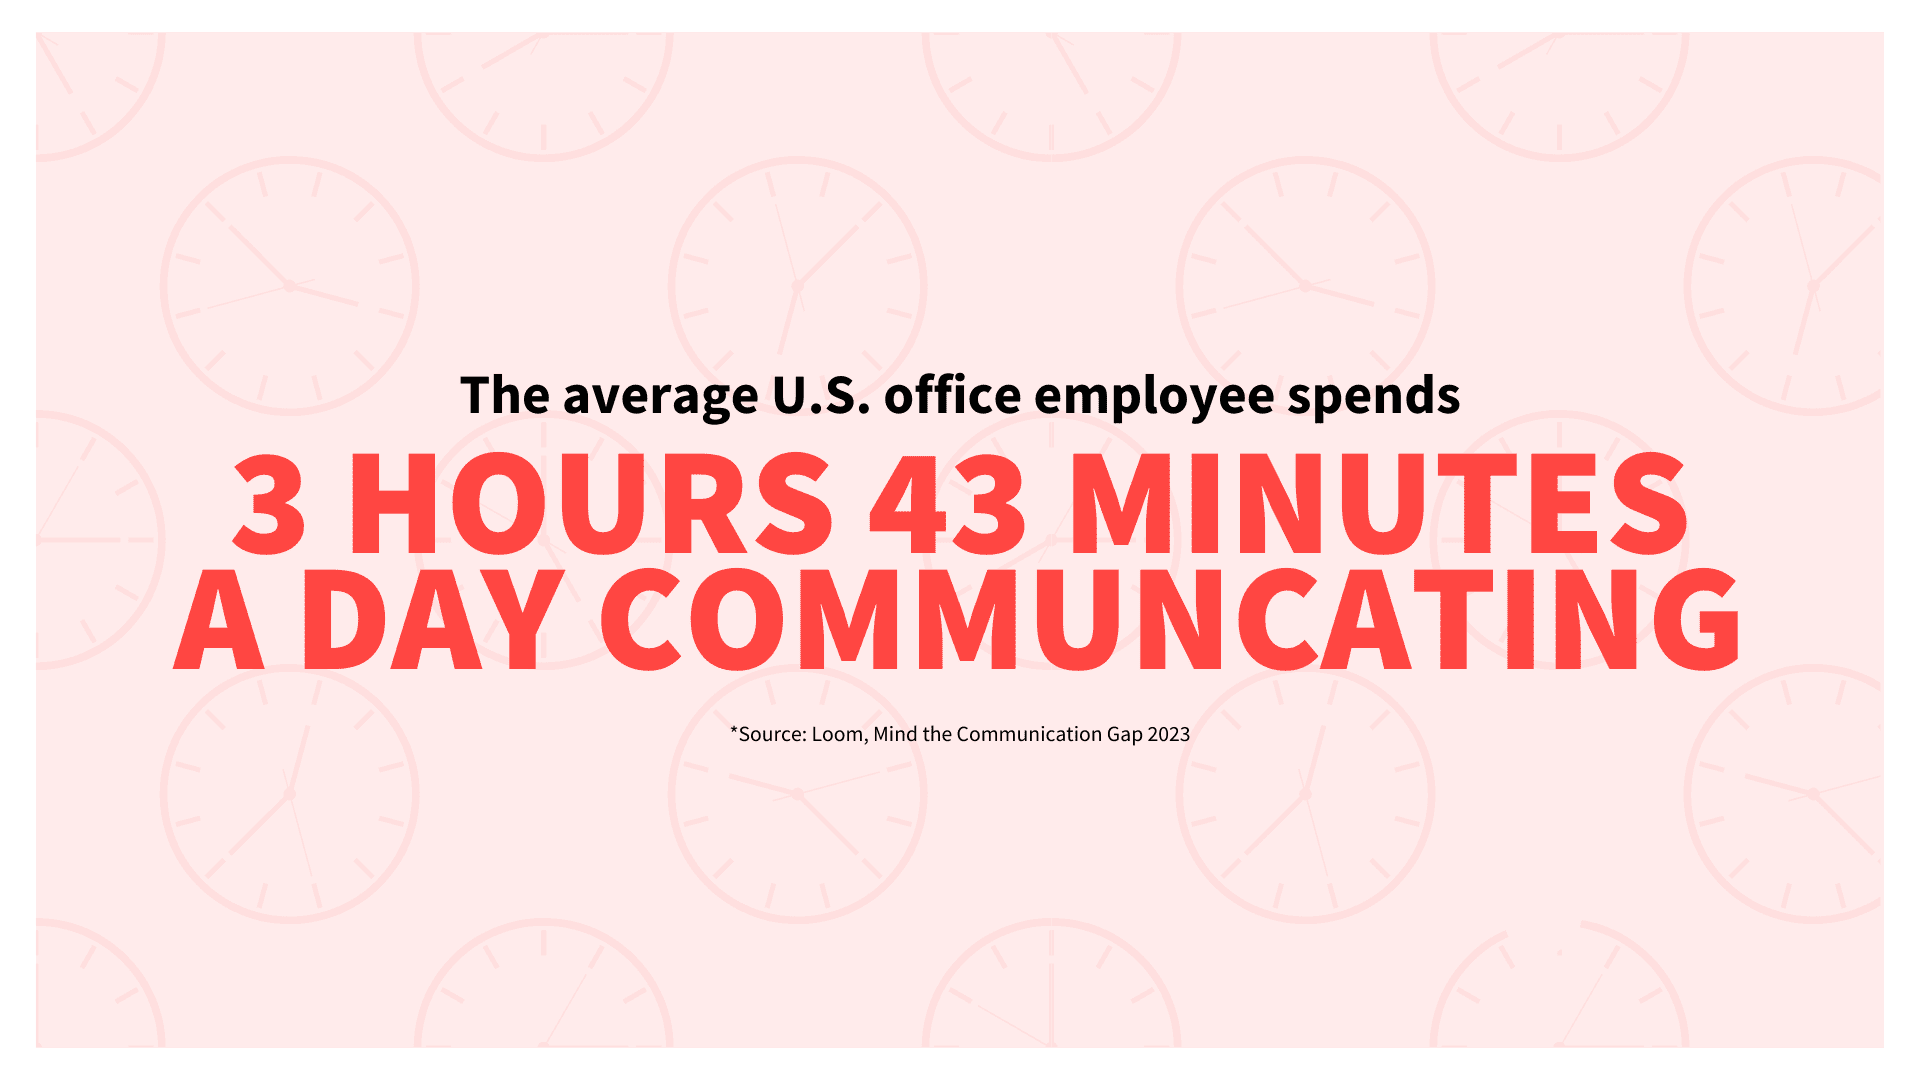 US Office Employees Spend 3 Hours 43 Minutes A Day Communicating at Work